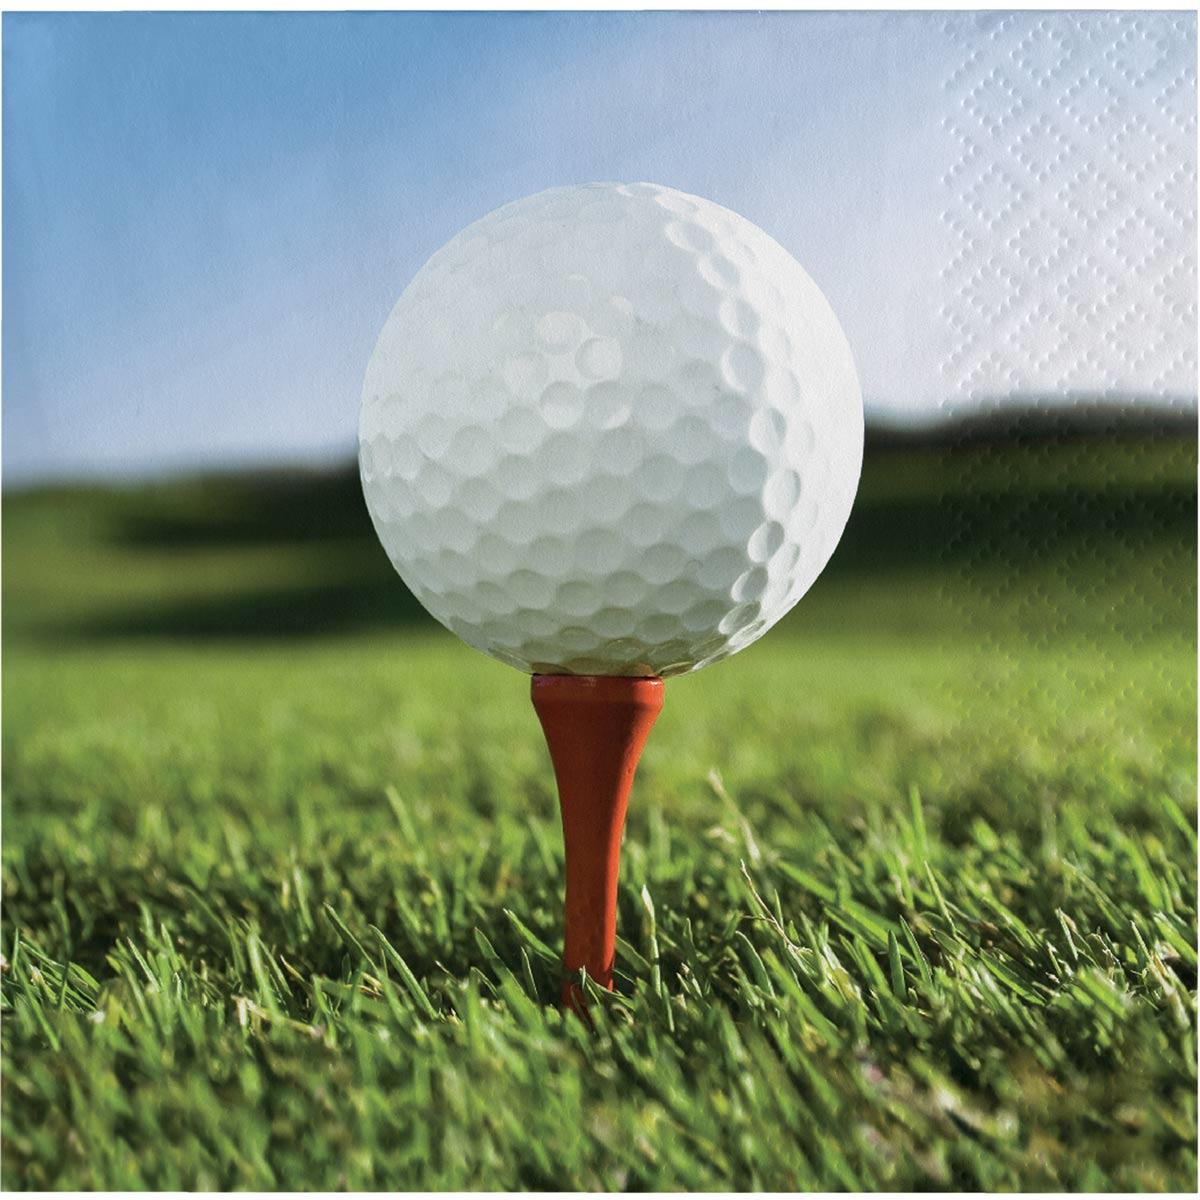 Pack 18 Sports Fantastic Golf Beverage Napkins by Creative Party 657965 available here at Karnival Costumes online party shop